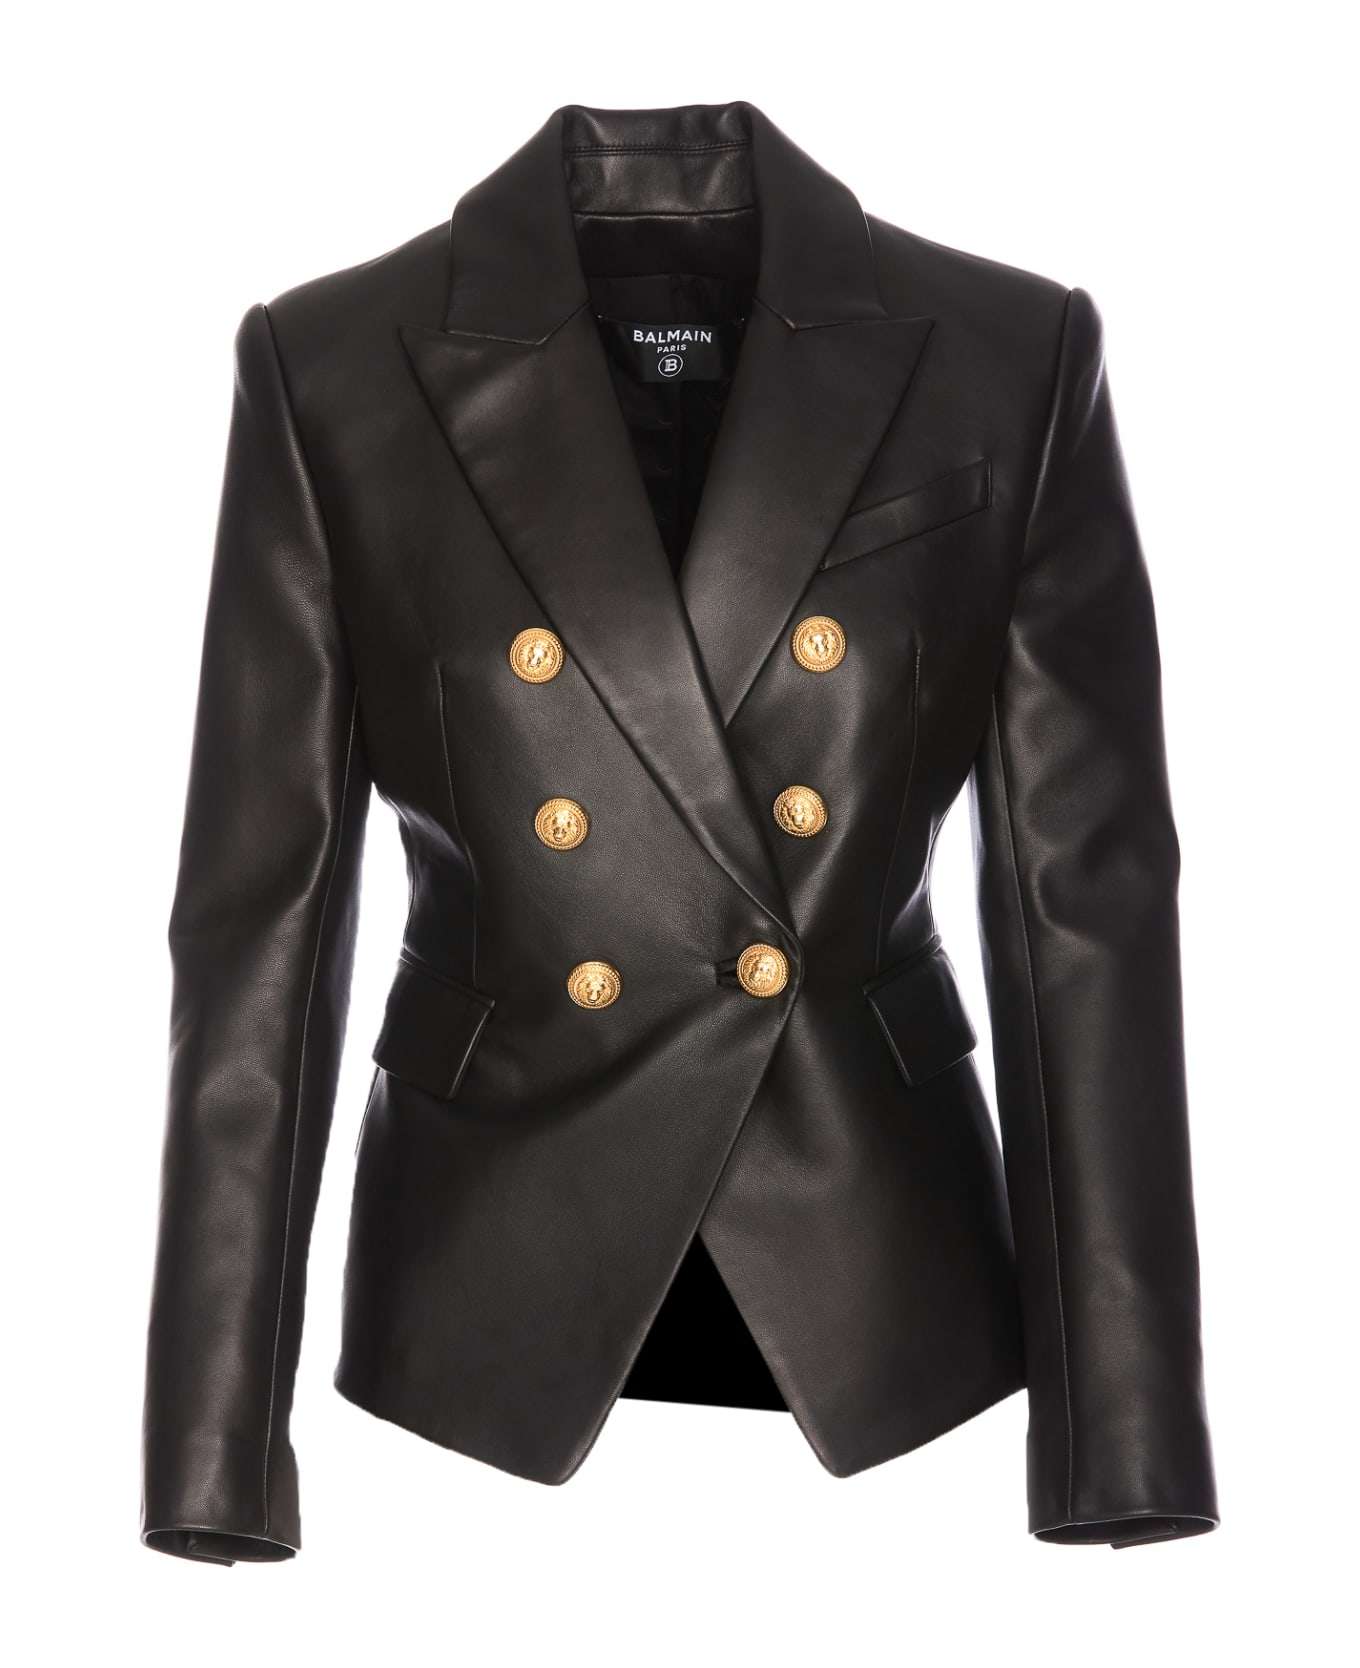 Balmain 6 Buttons Classic Leather Jacket - Black ブレザー